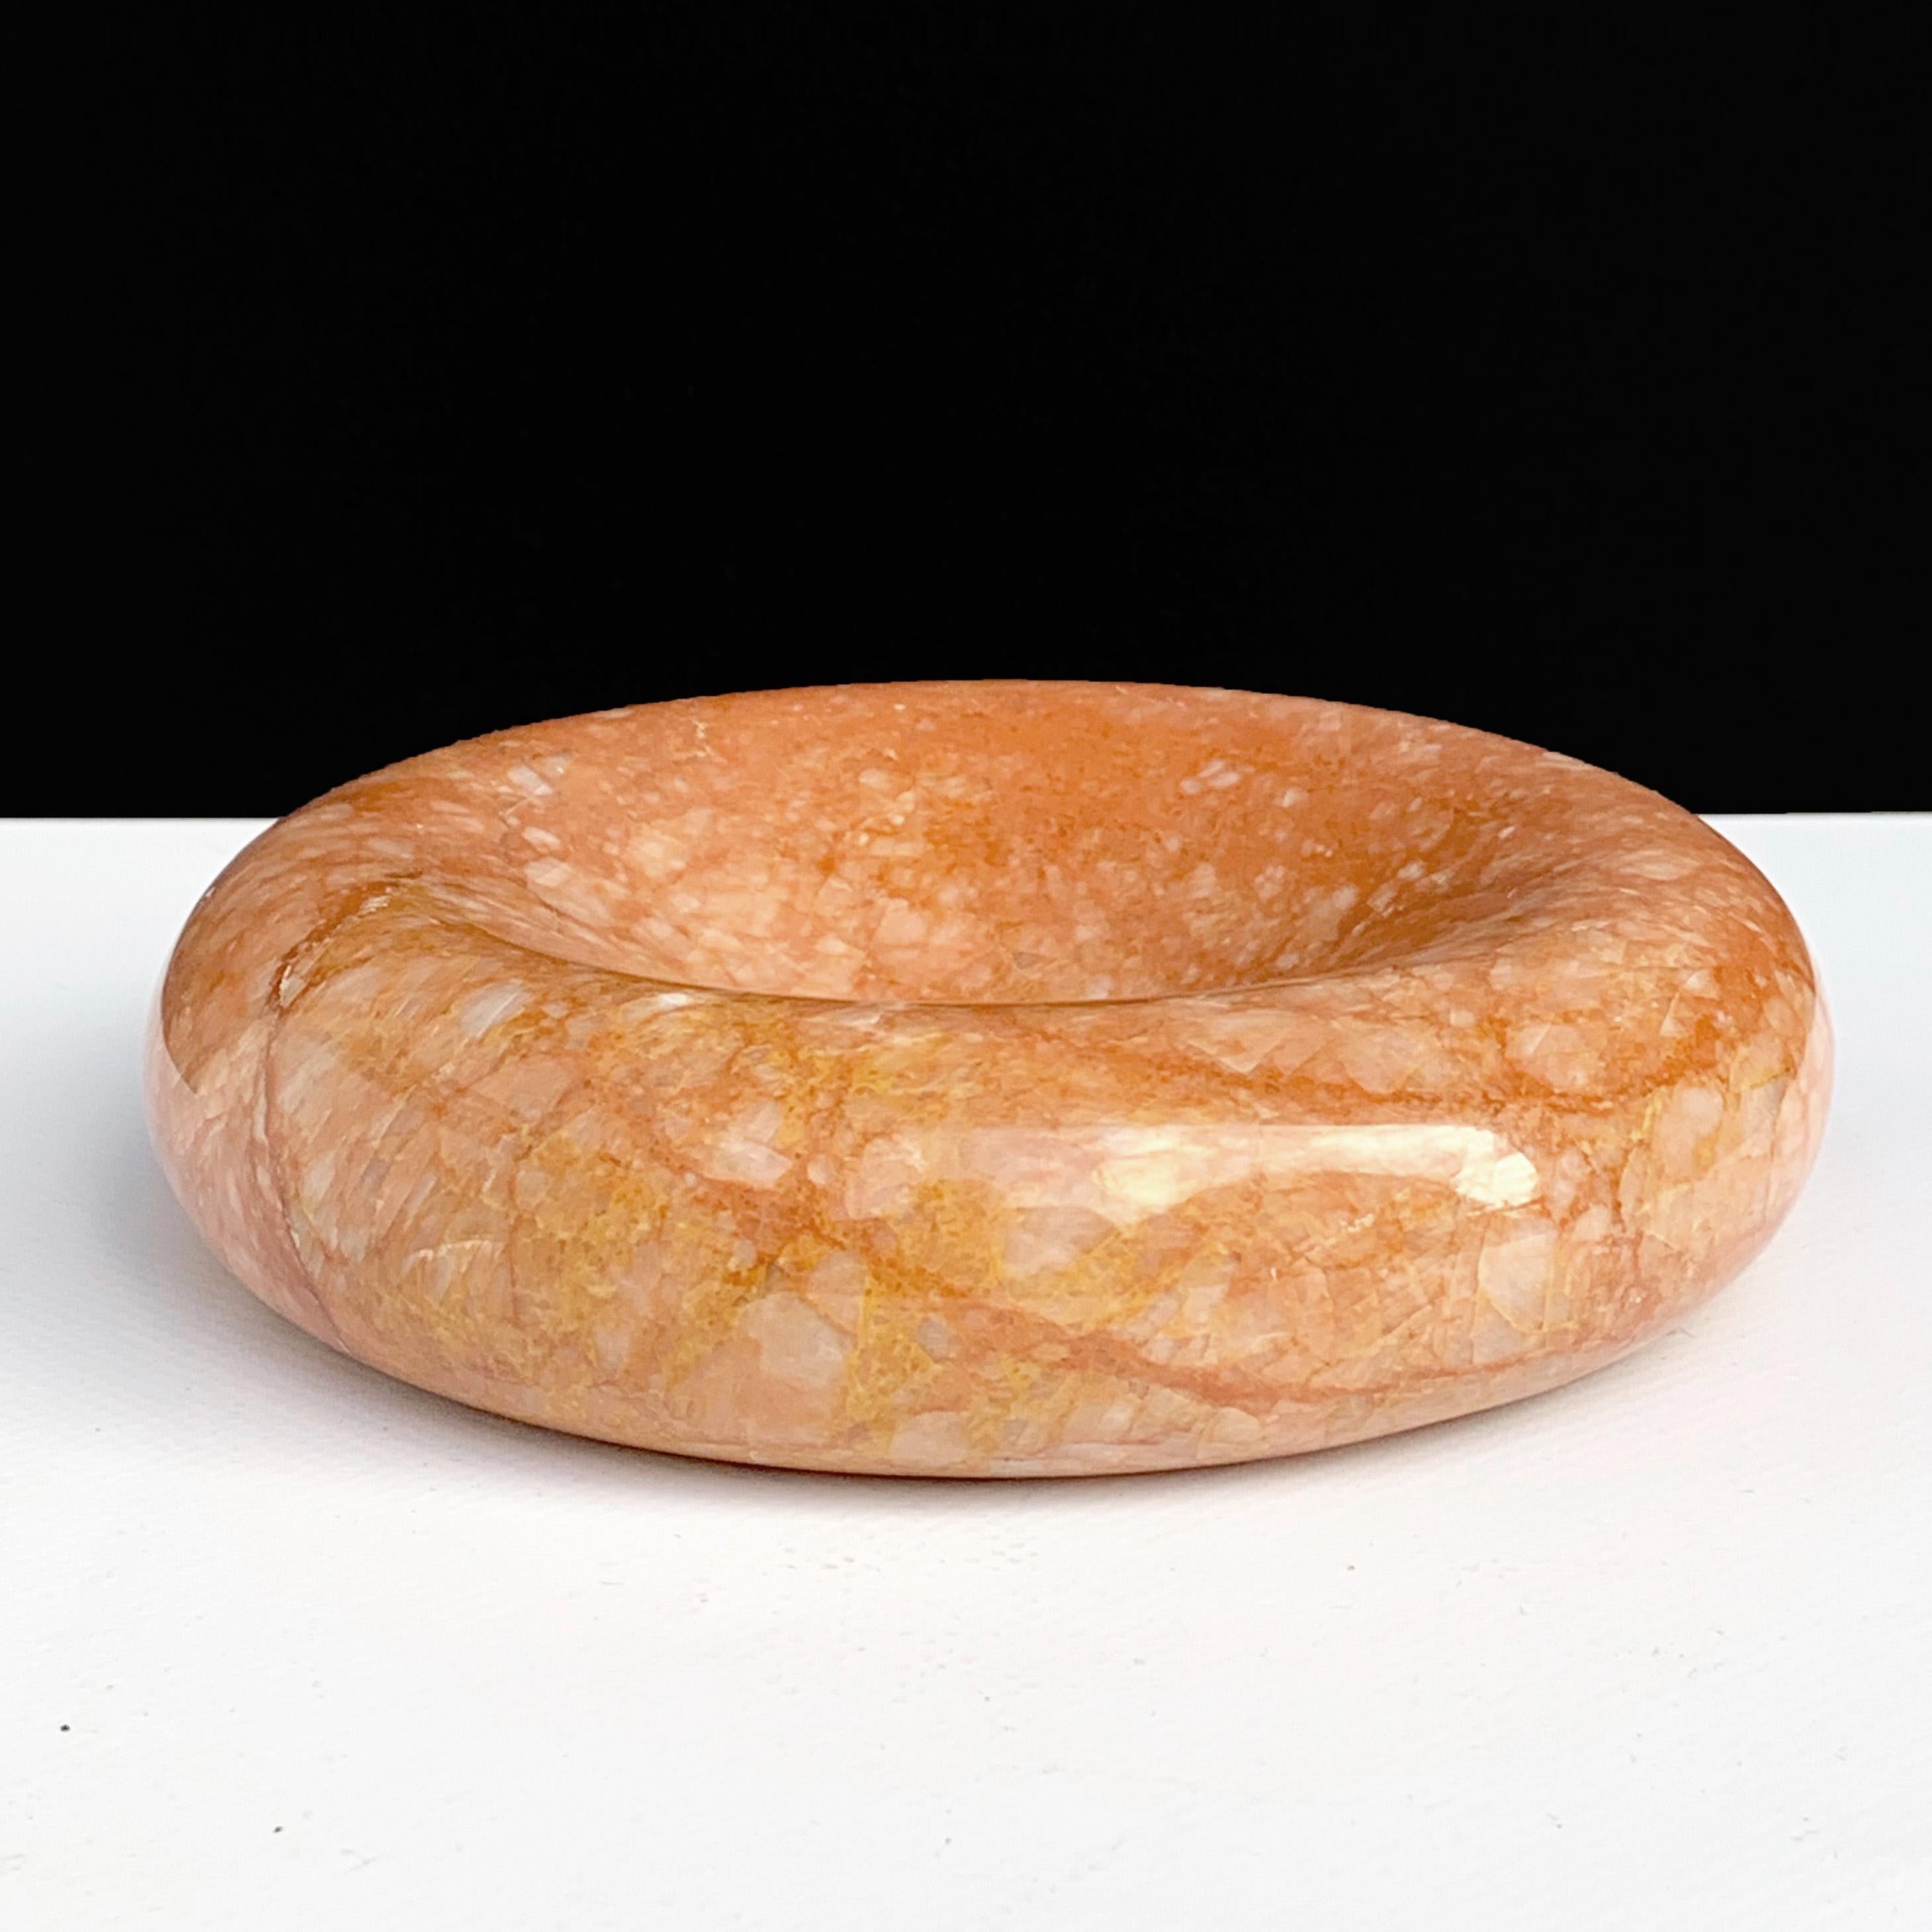 A beautiful pink, Italian marble.
Shallow bowl in salmon/pink marble.
Perfect state.